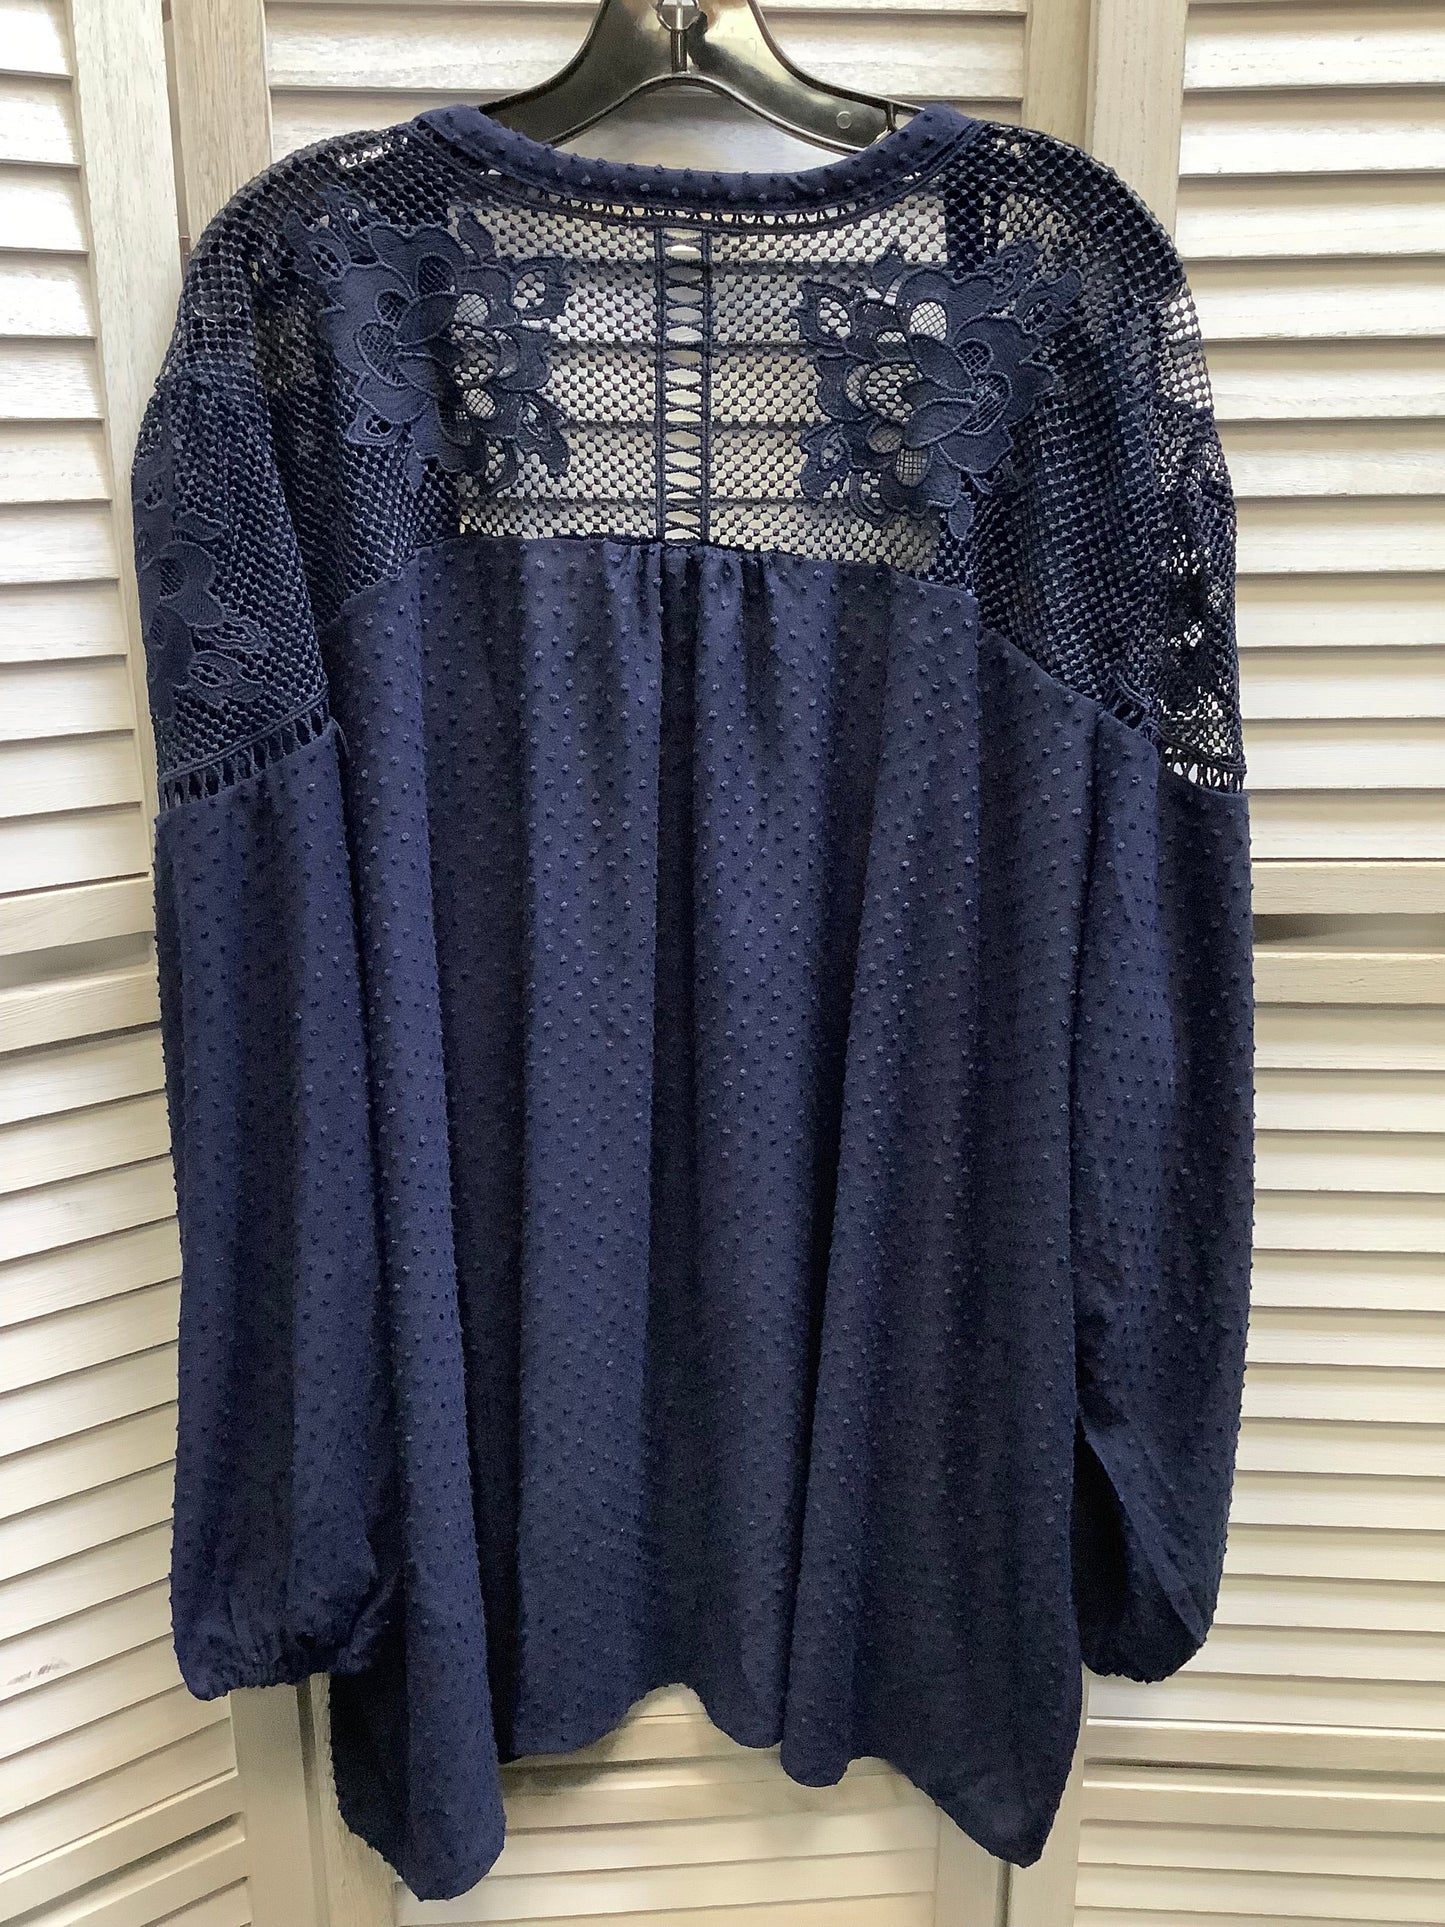 Navy Cardigan Maurices, Size 4x